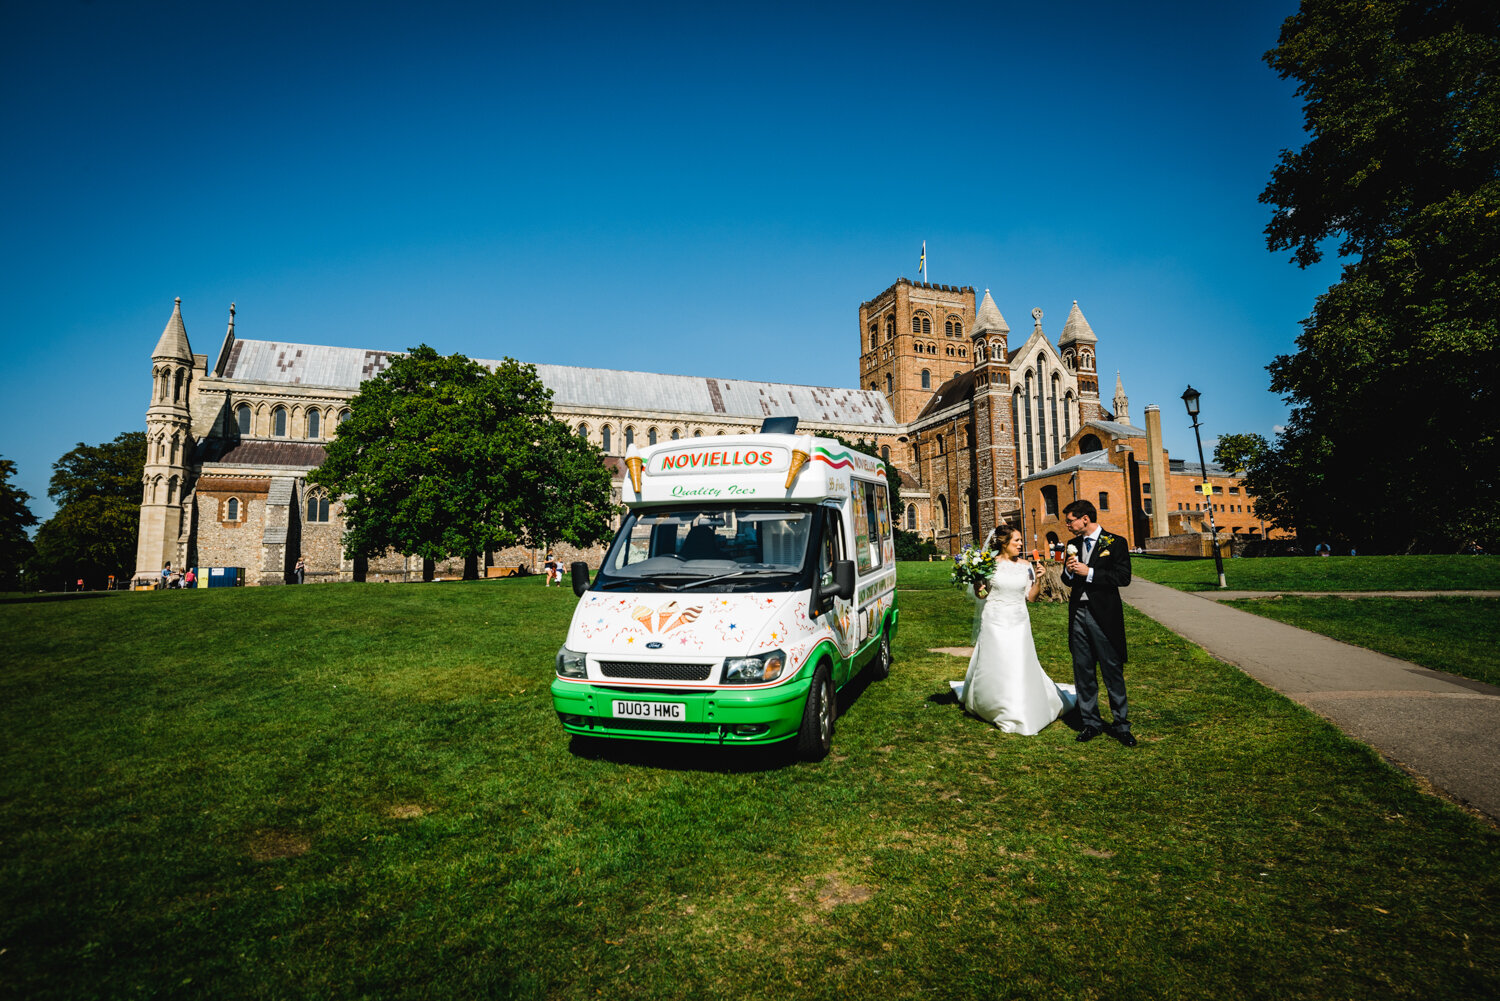 st-albans-cathedral-abbey-wedding-photos-pike-photography-344.jpg